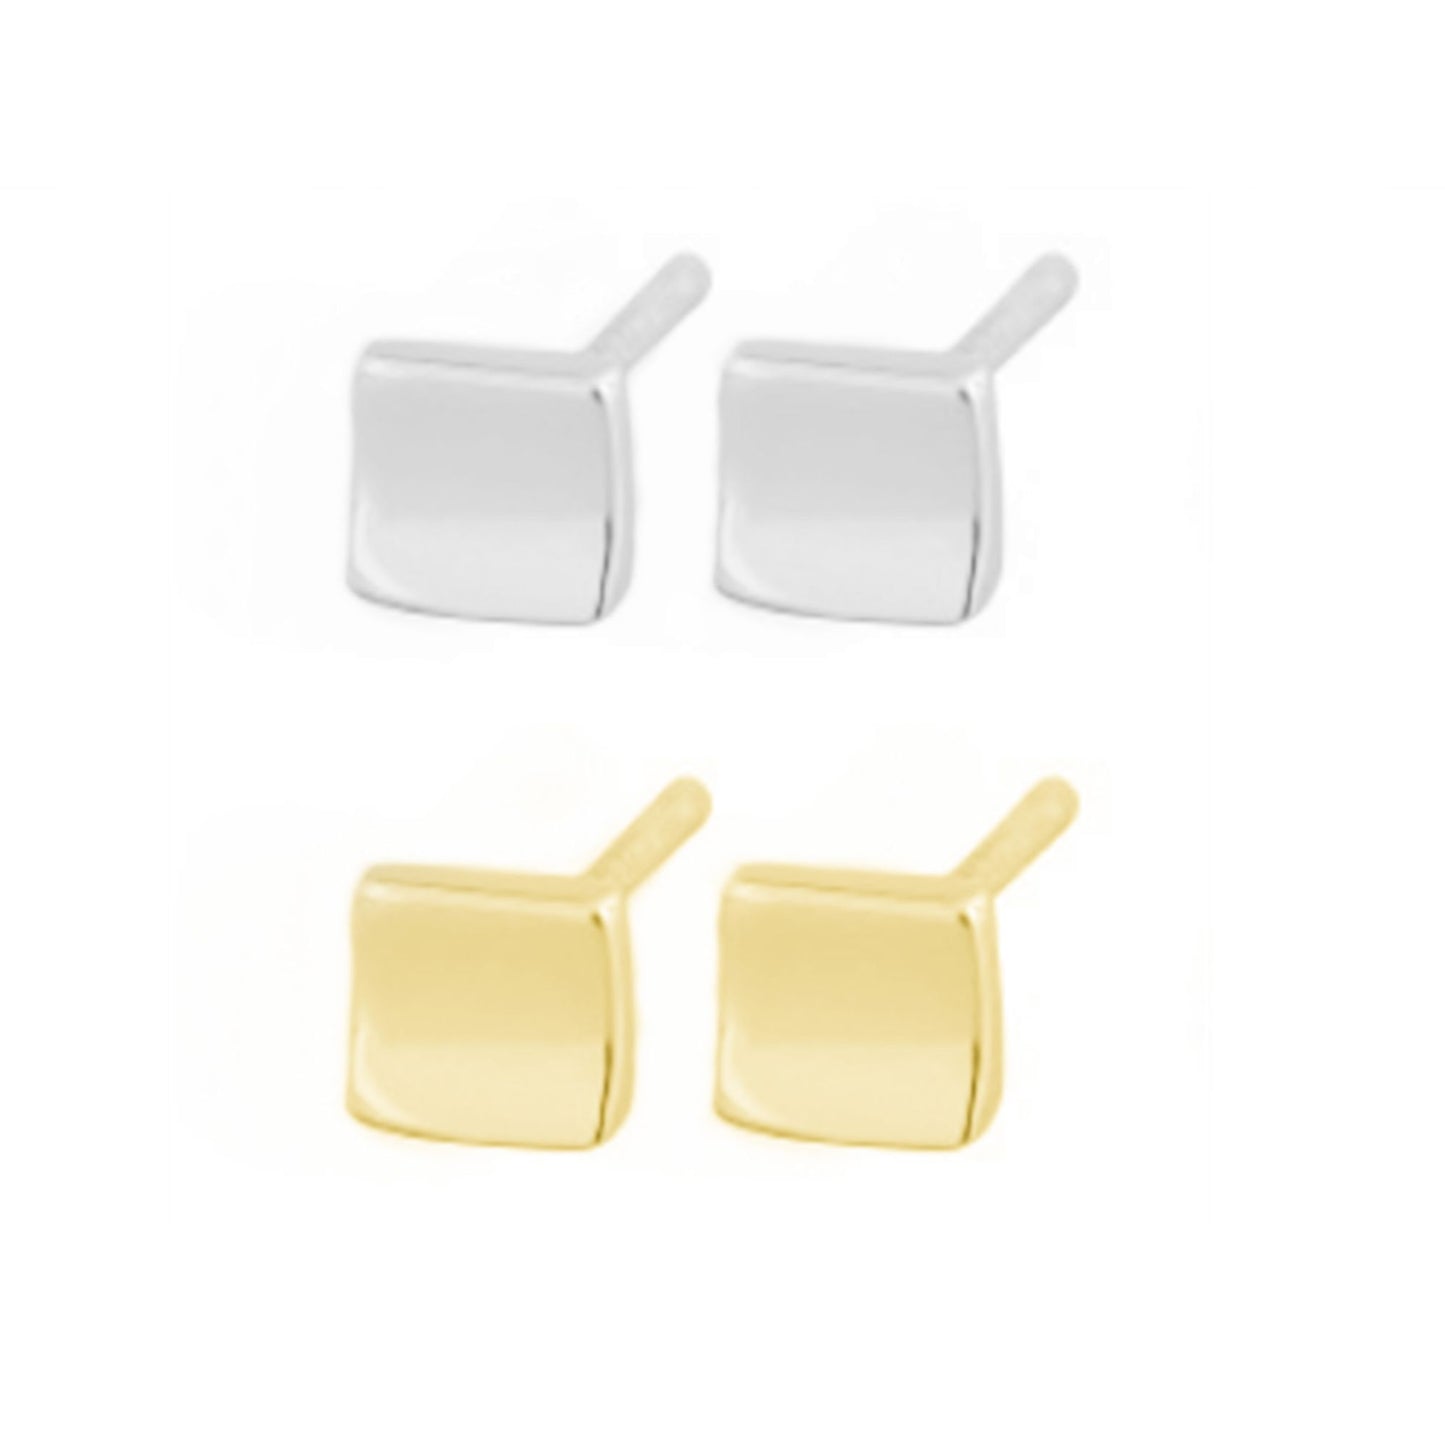 Sterling Silver Mini Bent Concaved Cube Square Stud Earrings 2 Tones - sugarkittenlondon